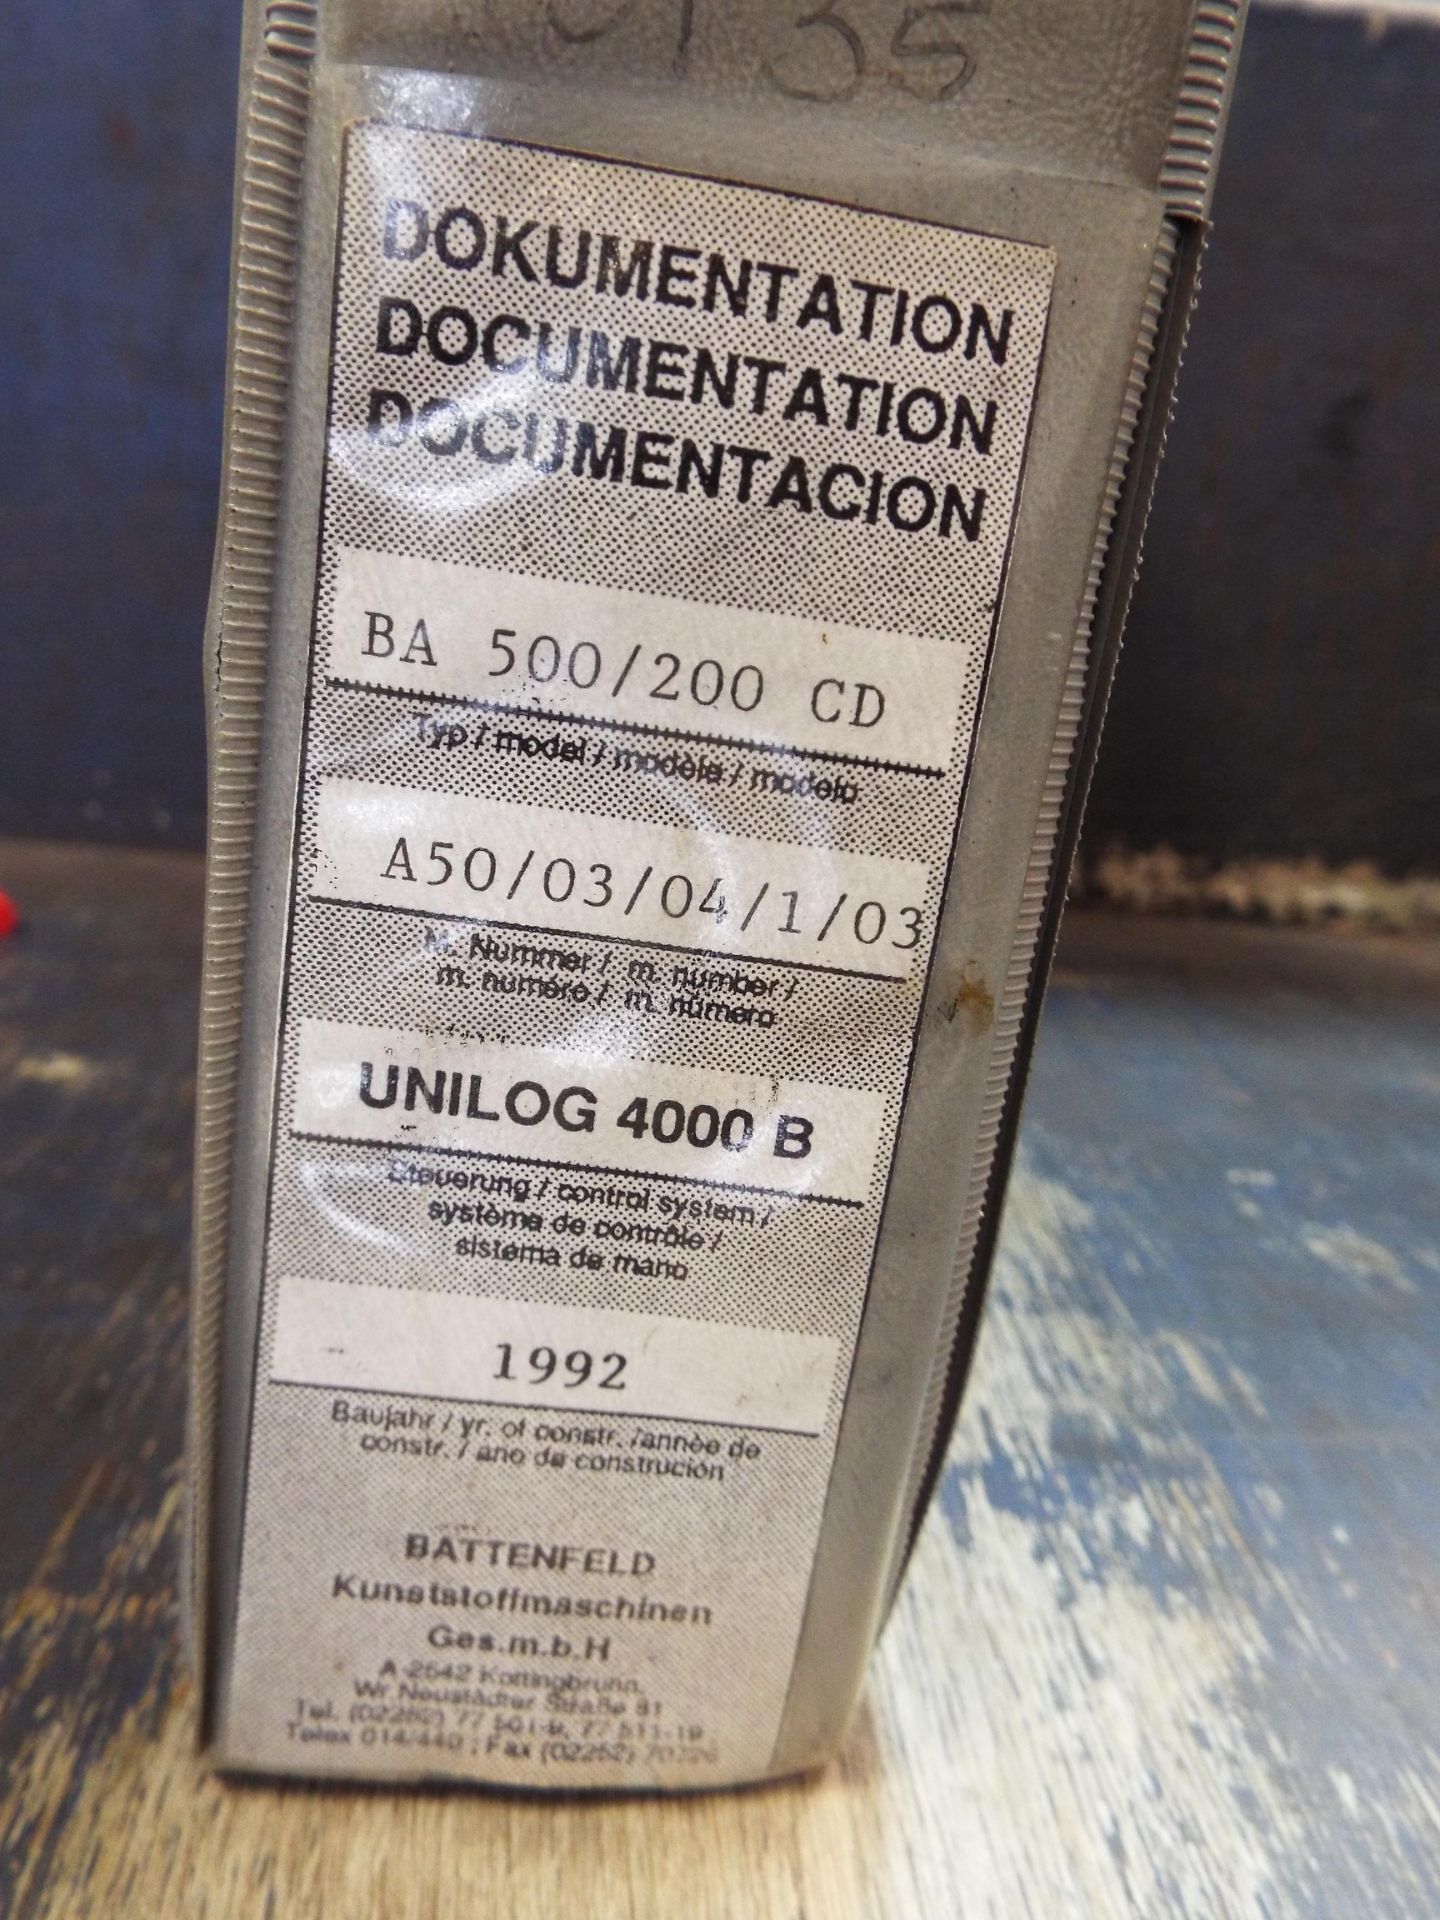 This is for a used Battenfeld BA500 CD Plus Plastic Injection Moulding Machine cw Unilog 4000 - Image 15 of 17